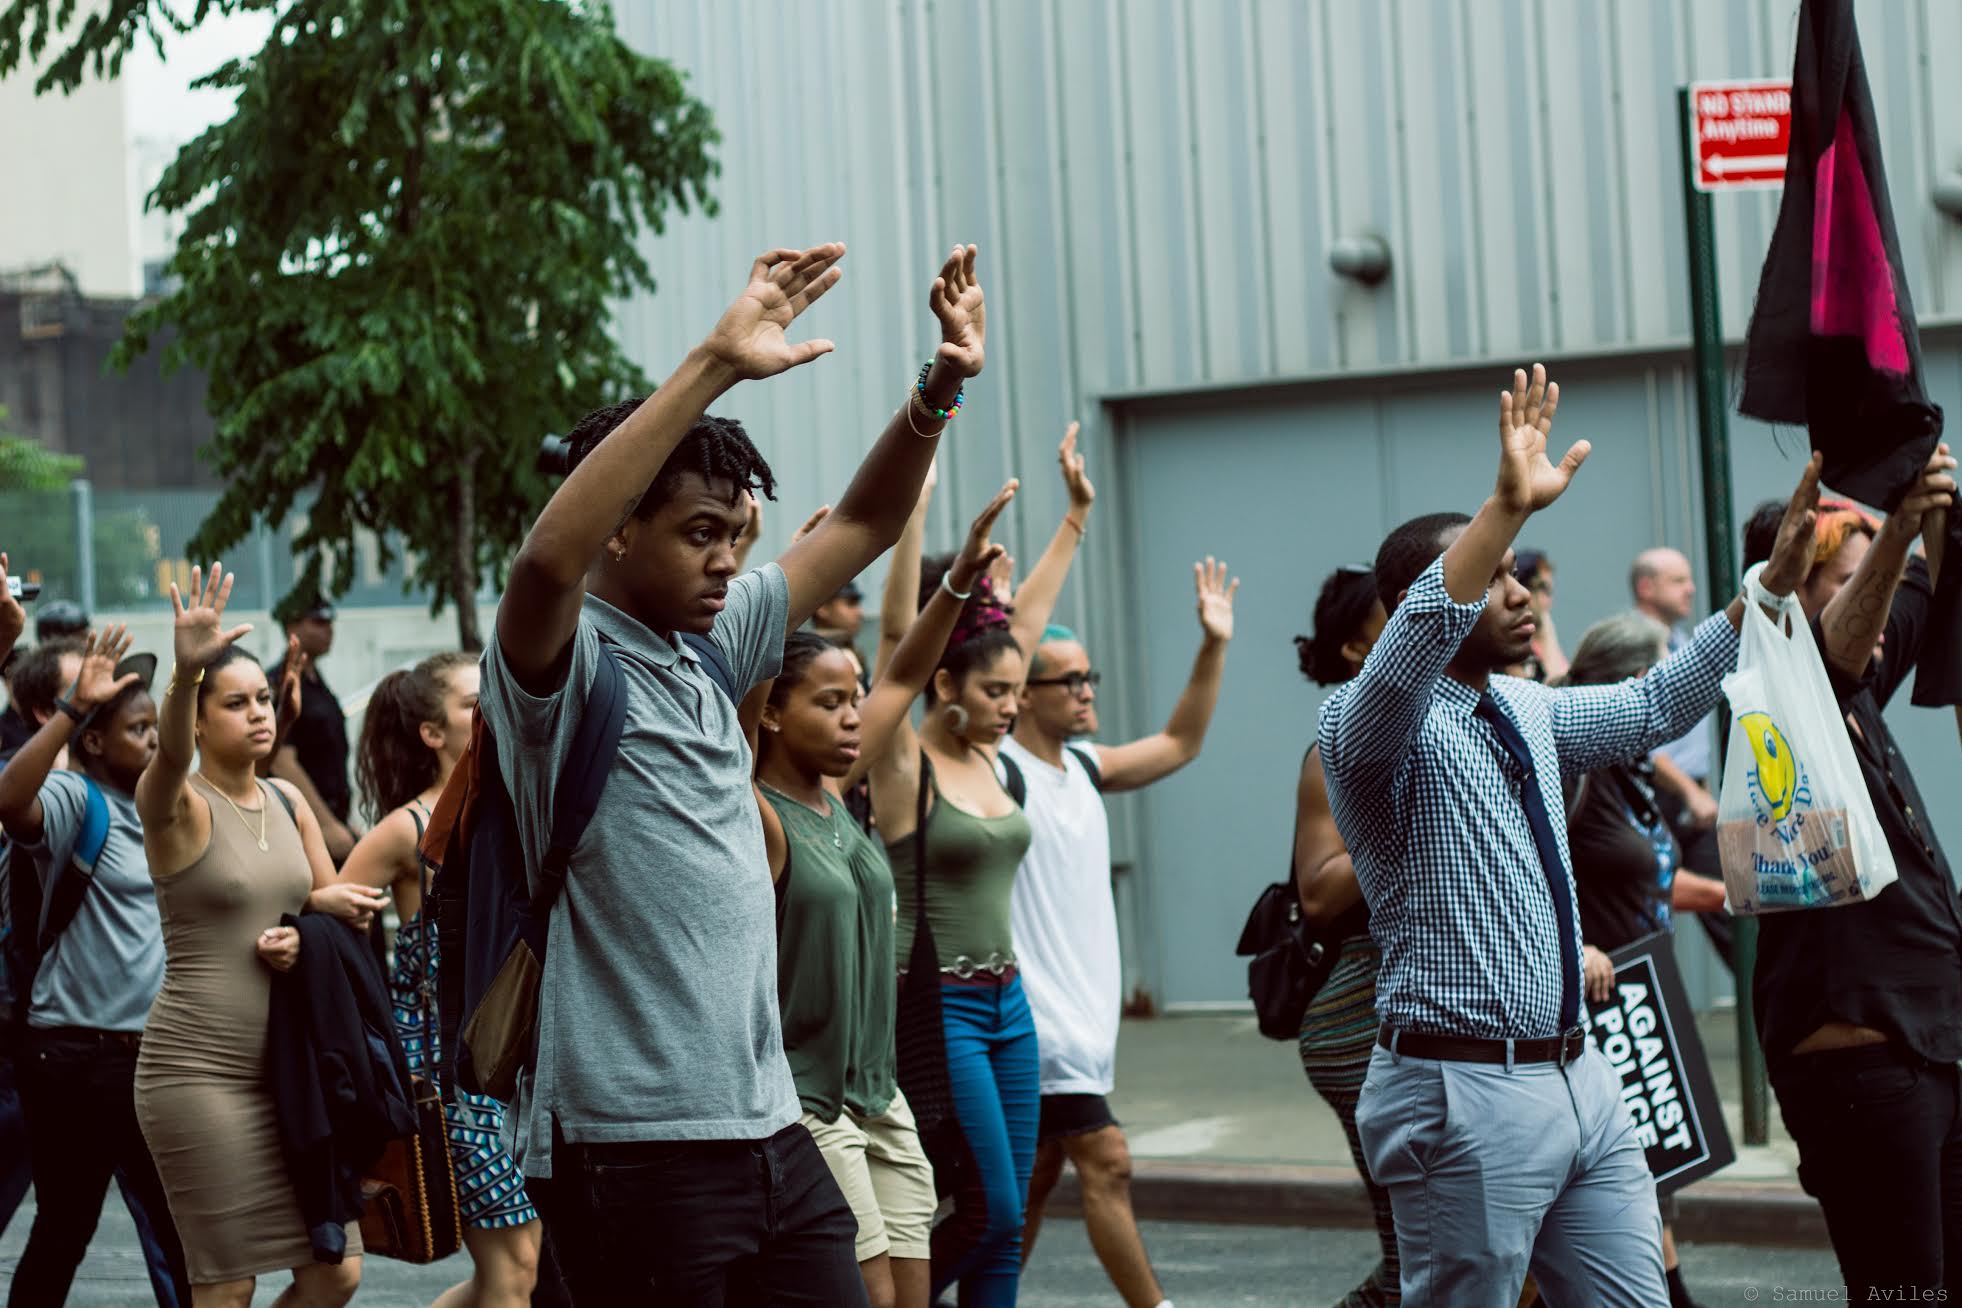 Protestors hold up their hands during the "hands up, don't shoot" chant on July 7th, in Manhattan, New York. The march went through most major areas in Manhattan.